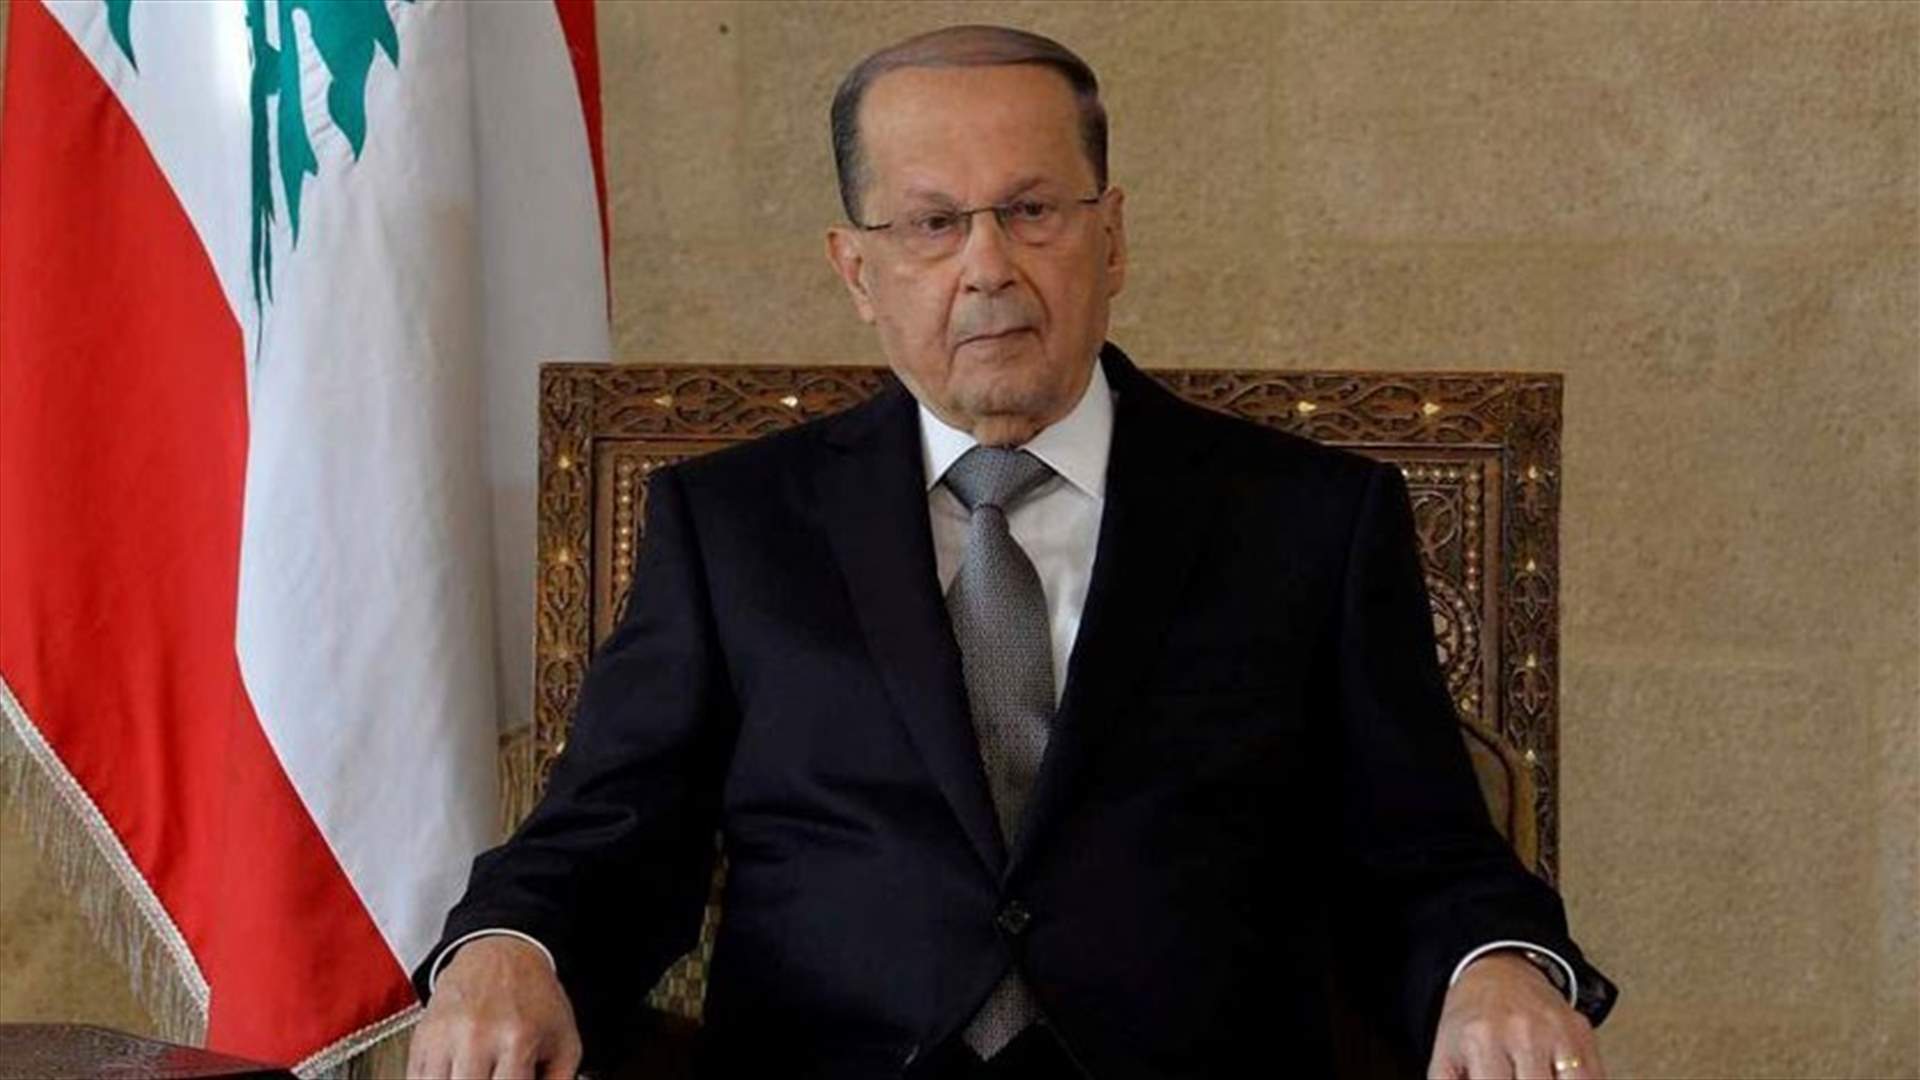 President Aoun says no leniency in imposing justice and preventing corruption